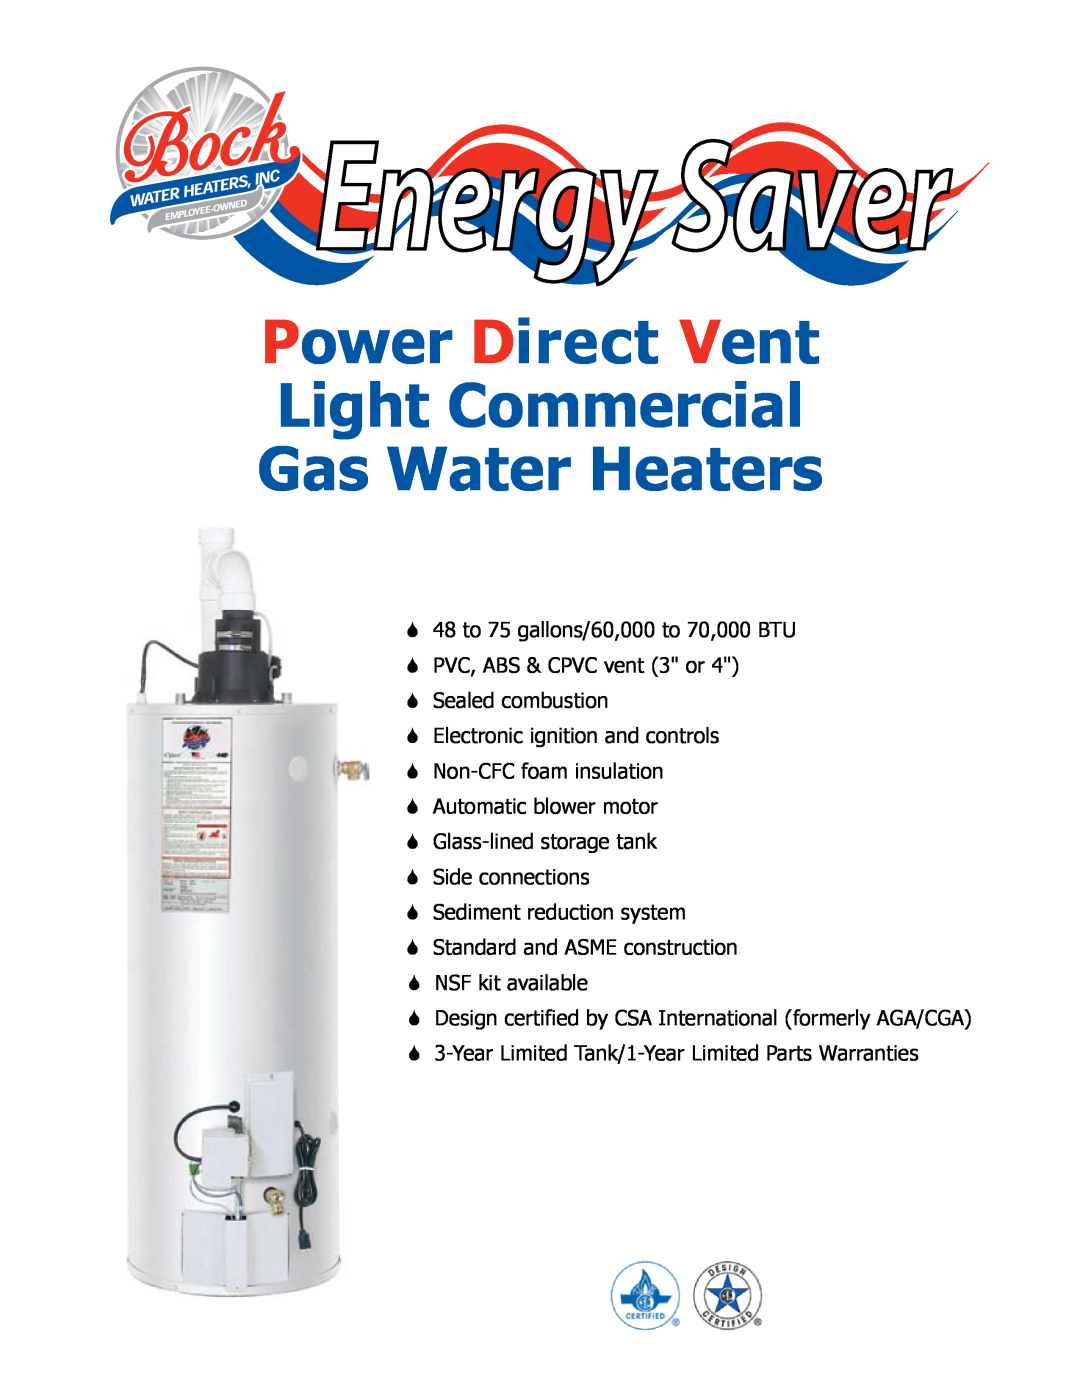 Bock Water heaters 80030 manual Energy Saver, Power Direct Vent Light Commercial Gas Water Heaters 